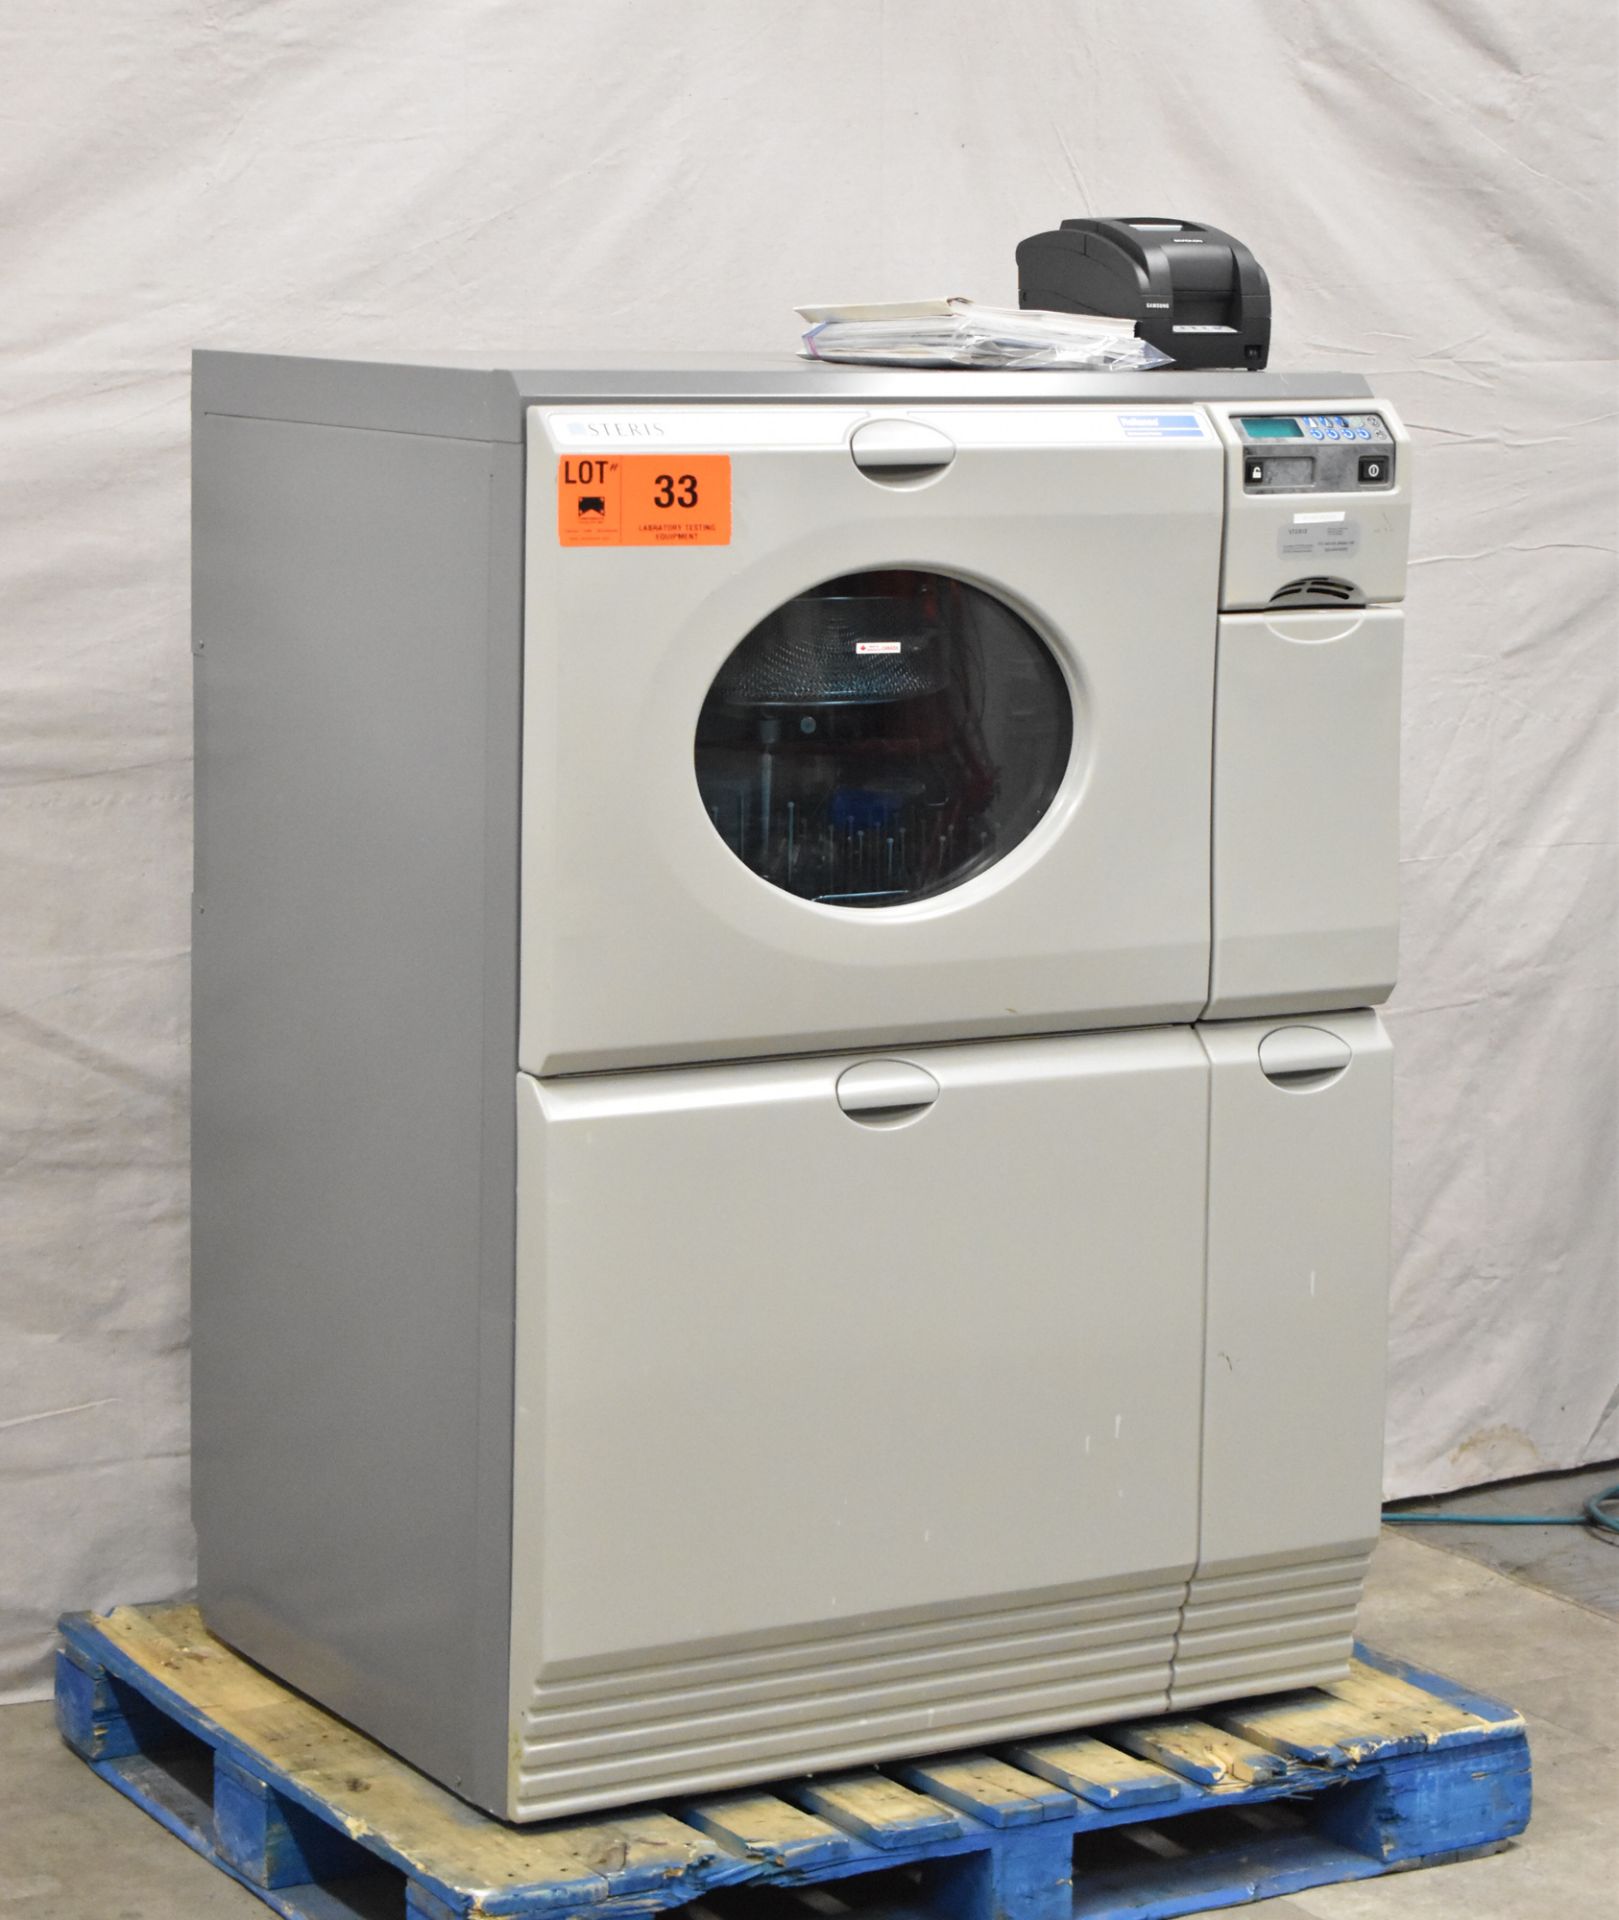 STERIS RELIANCE 250 ULTRA WASH PLUS LABORATORY GLASSWARE WASHER WITH DIGITAL TOUCH SCREEN CONTROL, - Image 2 of 7